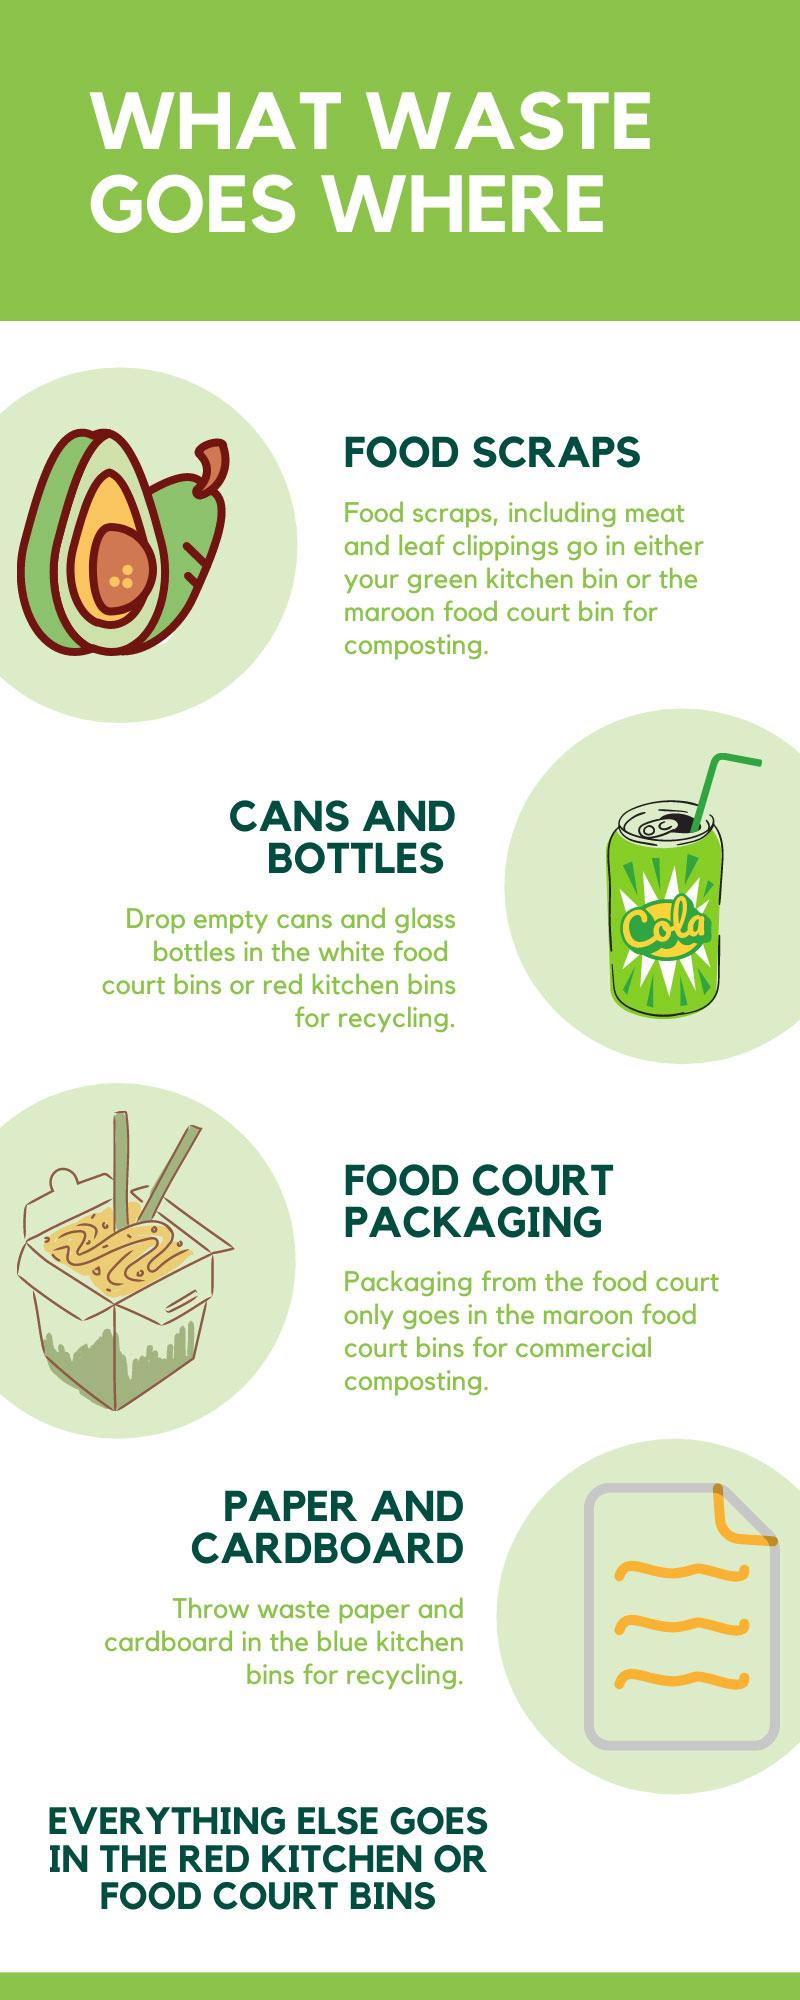 Food waste infographic explaining what goes on which bin